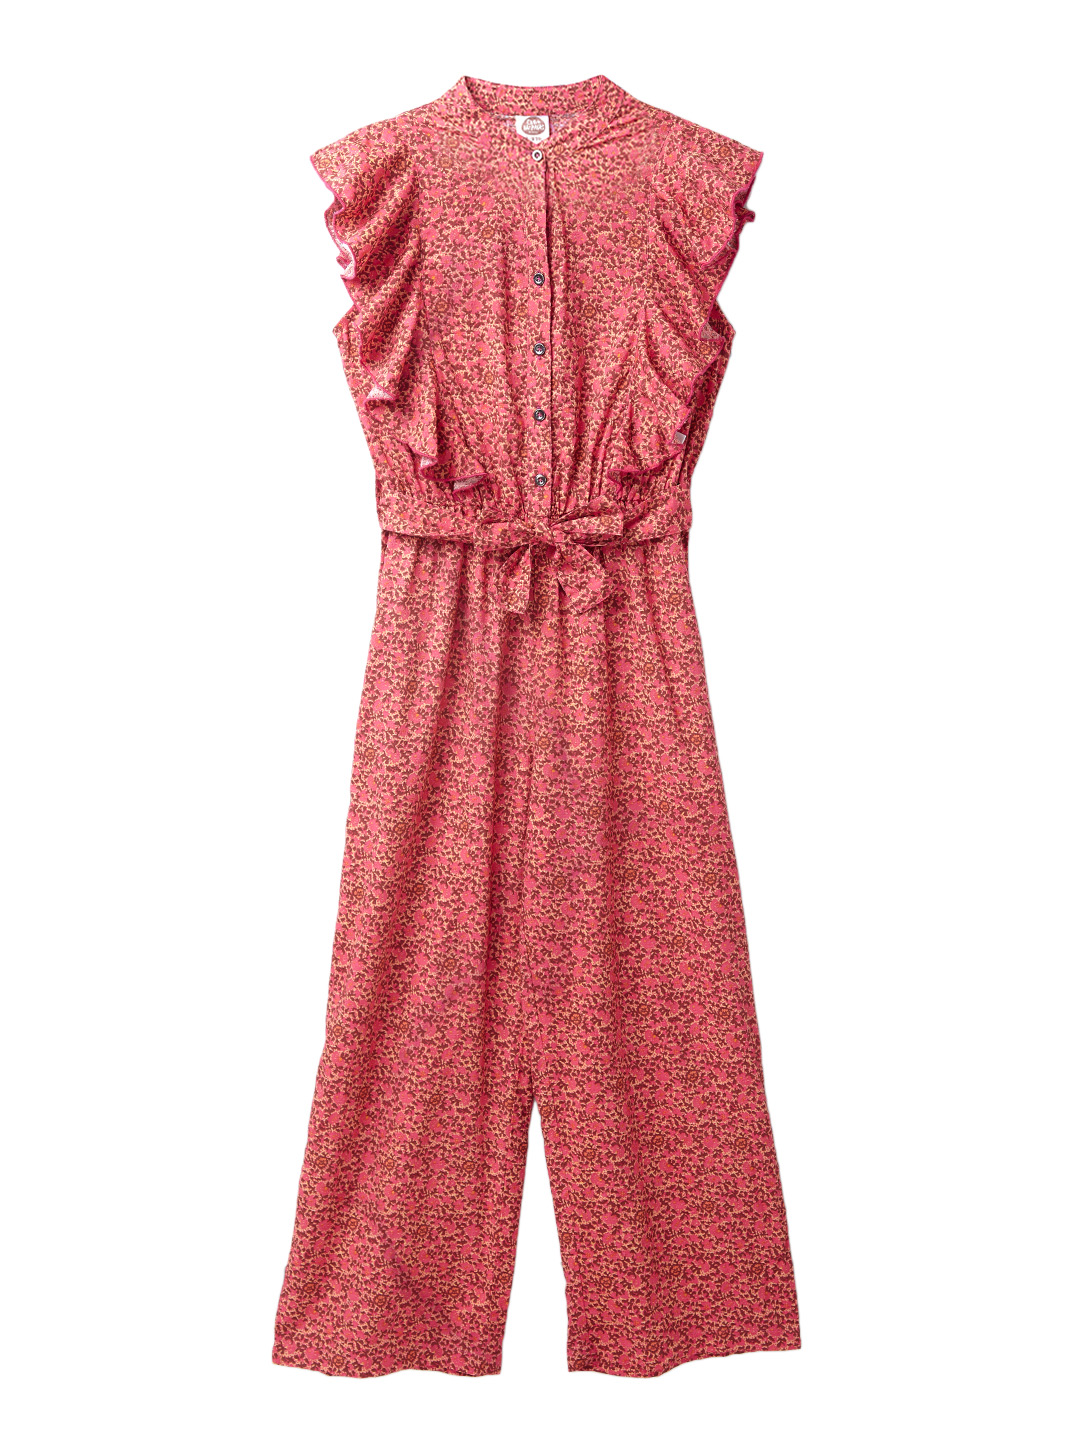 Girls Jumpsuit in Red Color Buy Online from Cub McPaws